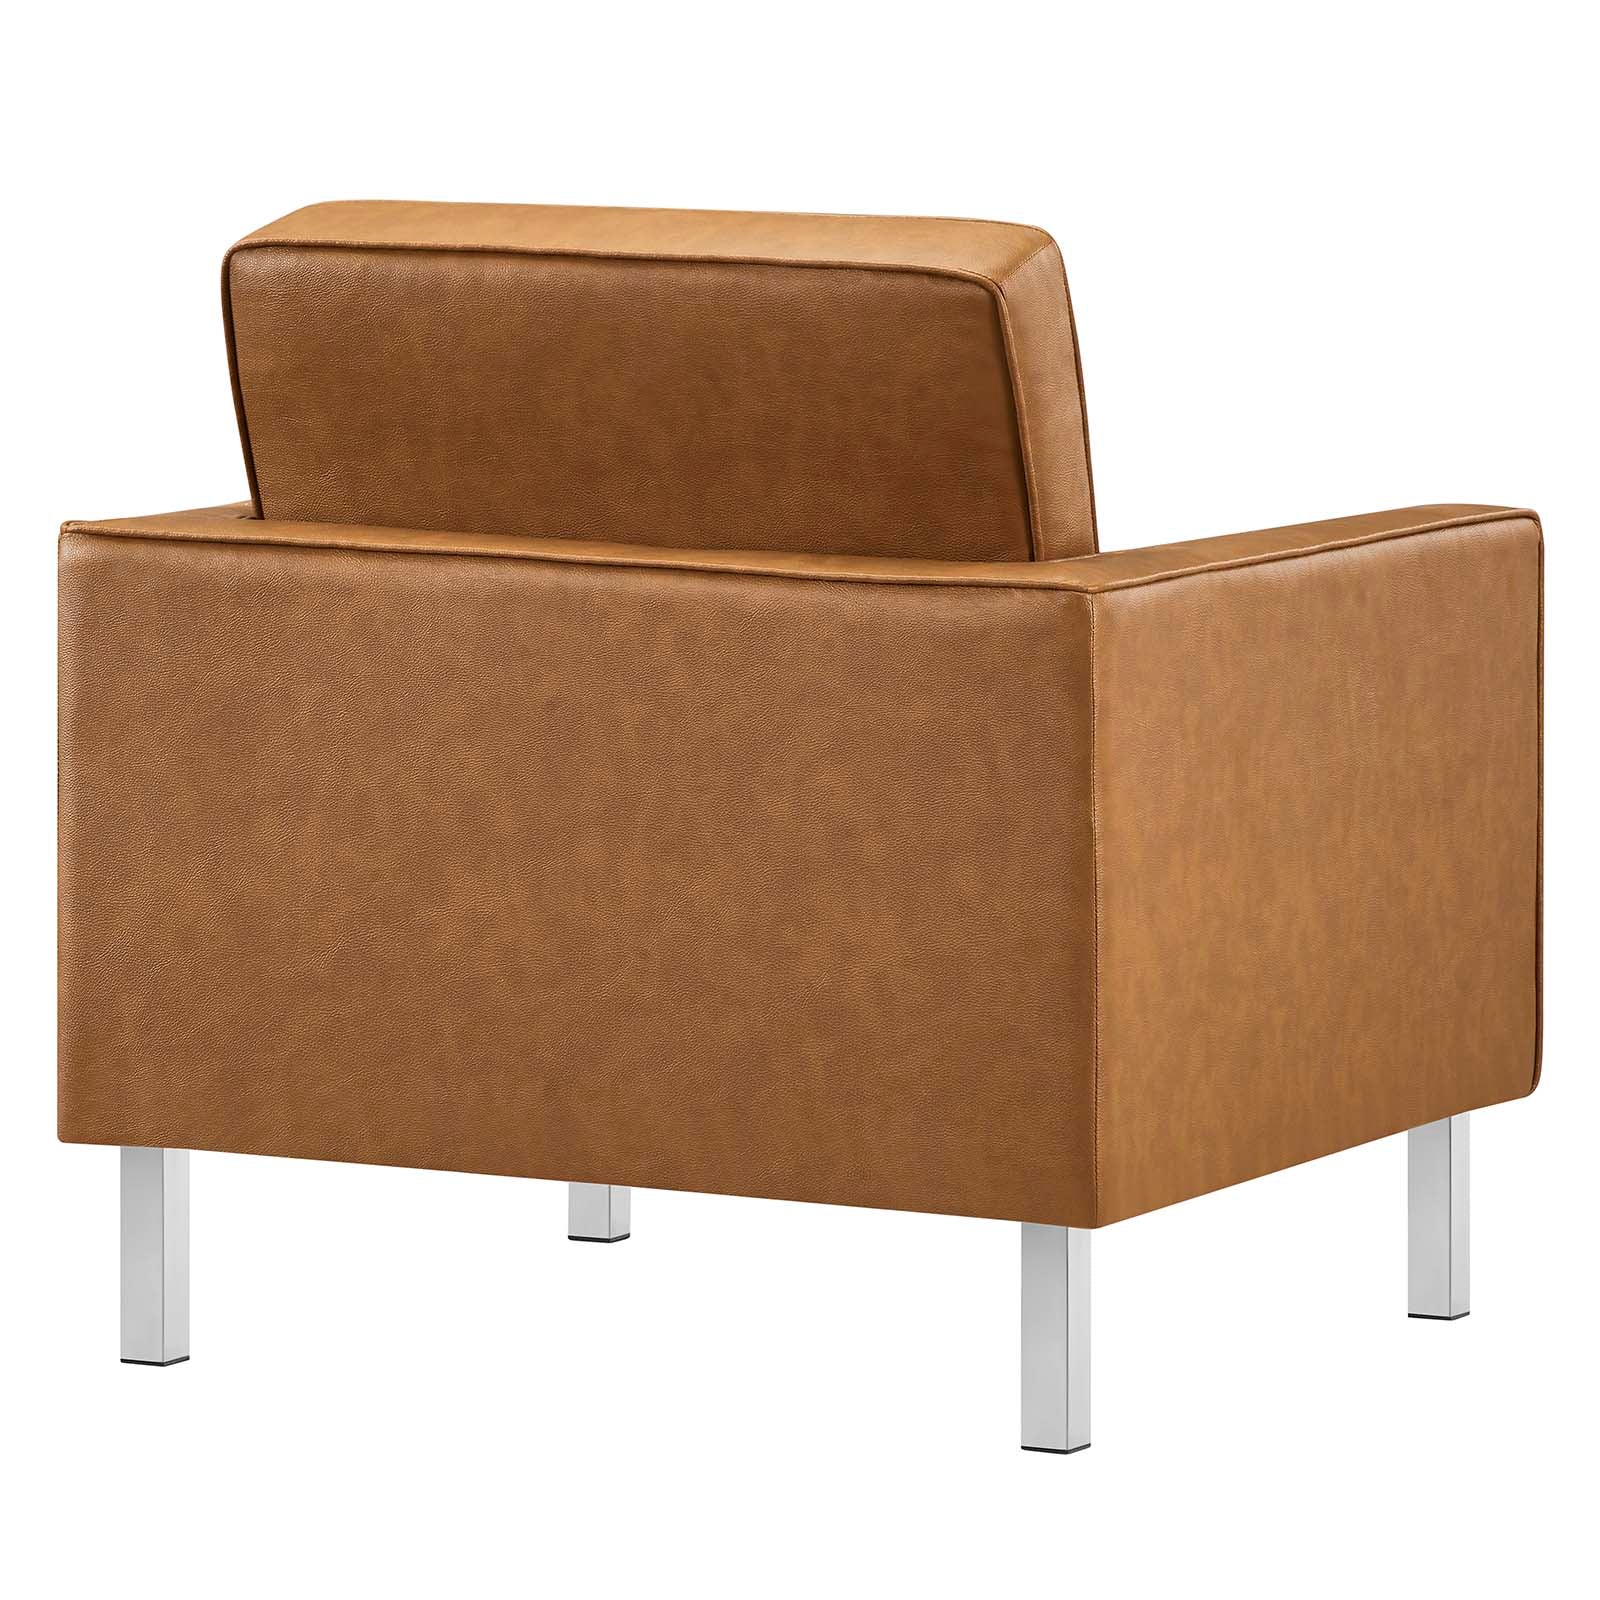 Loft Tufted Vegan Leather Armchair and Ottoman Set - East Shore Modern Home Furnishings